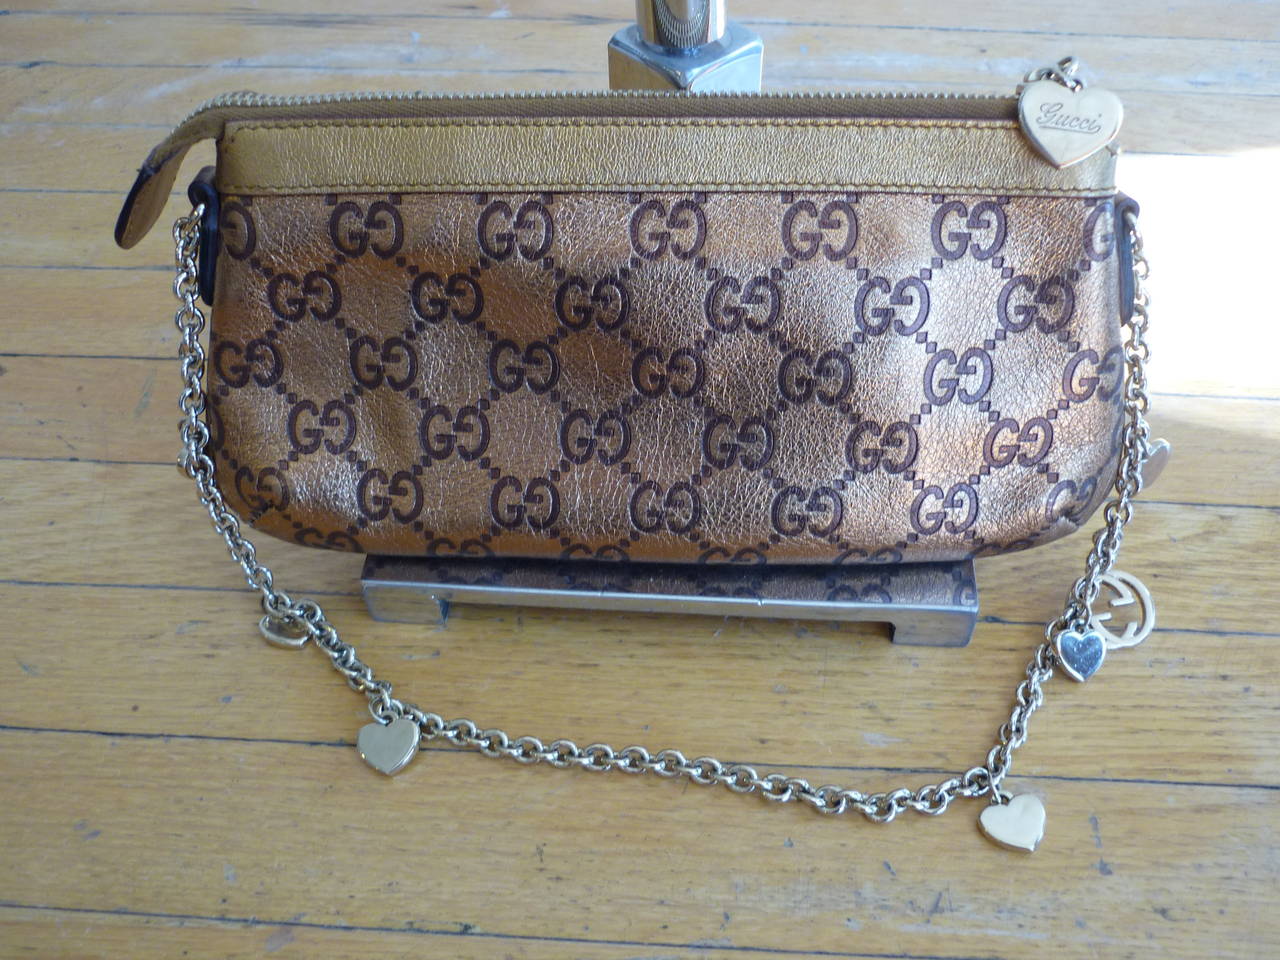 Metallic gold with brown Gucci logo leather and chain link shoulder strap featuring heart charms, this is a lovely evening bag, or go ahead and wear it with jeans!

The interior has a single slit pocket and zip closure at top. It is in excellent